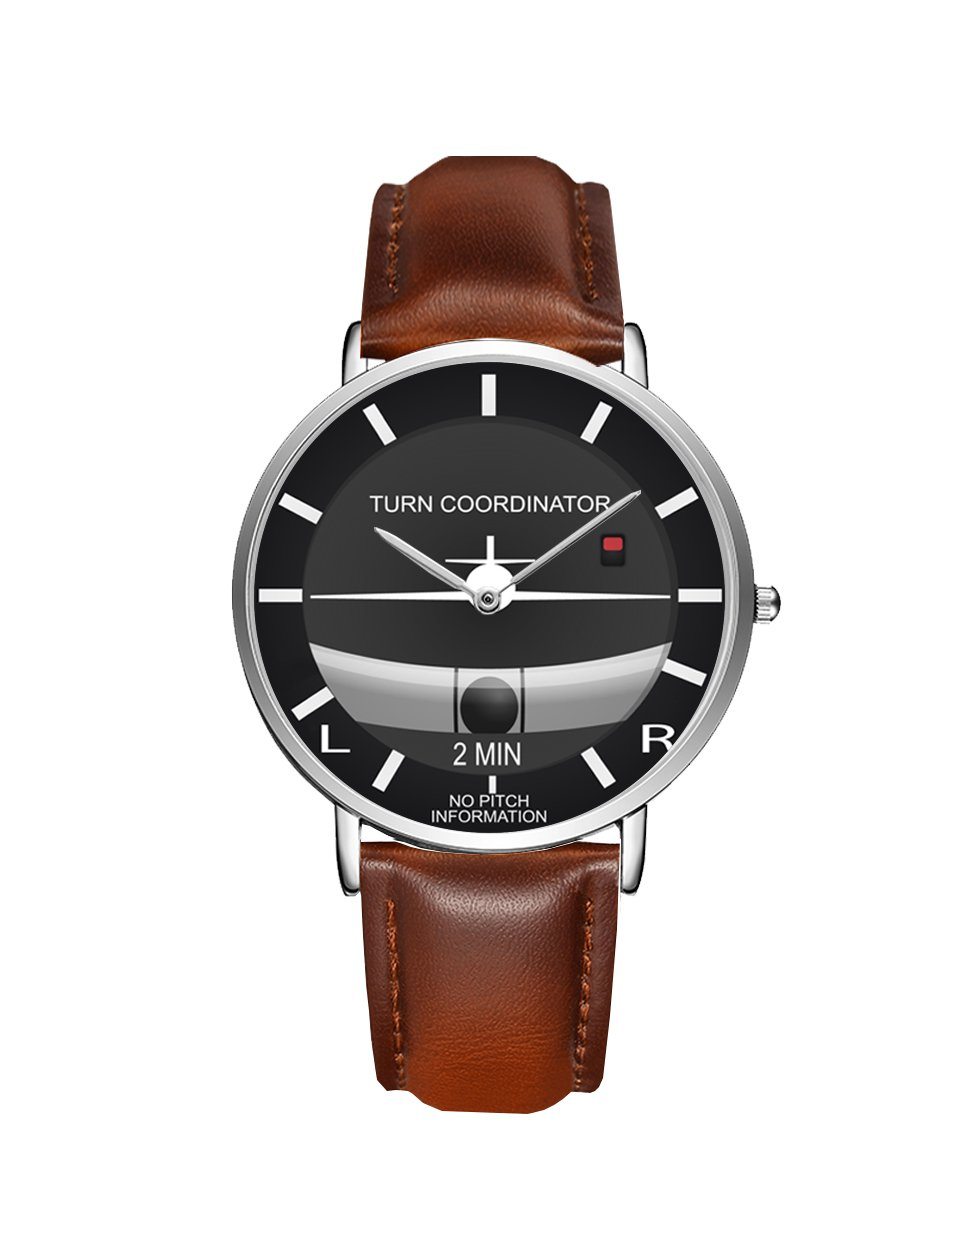 Airplane Instrument Series (Turn Coordinator) Leather Strap Watches Pilot Eyes Store Silver & Brown Leather Strap 